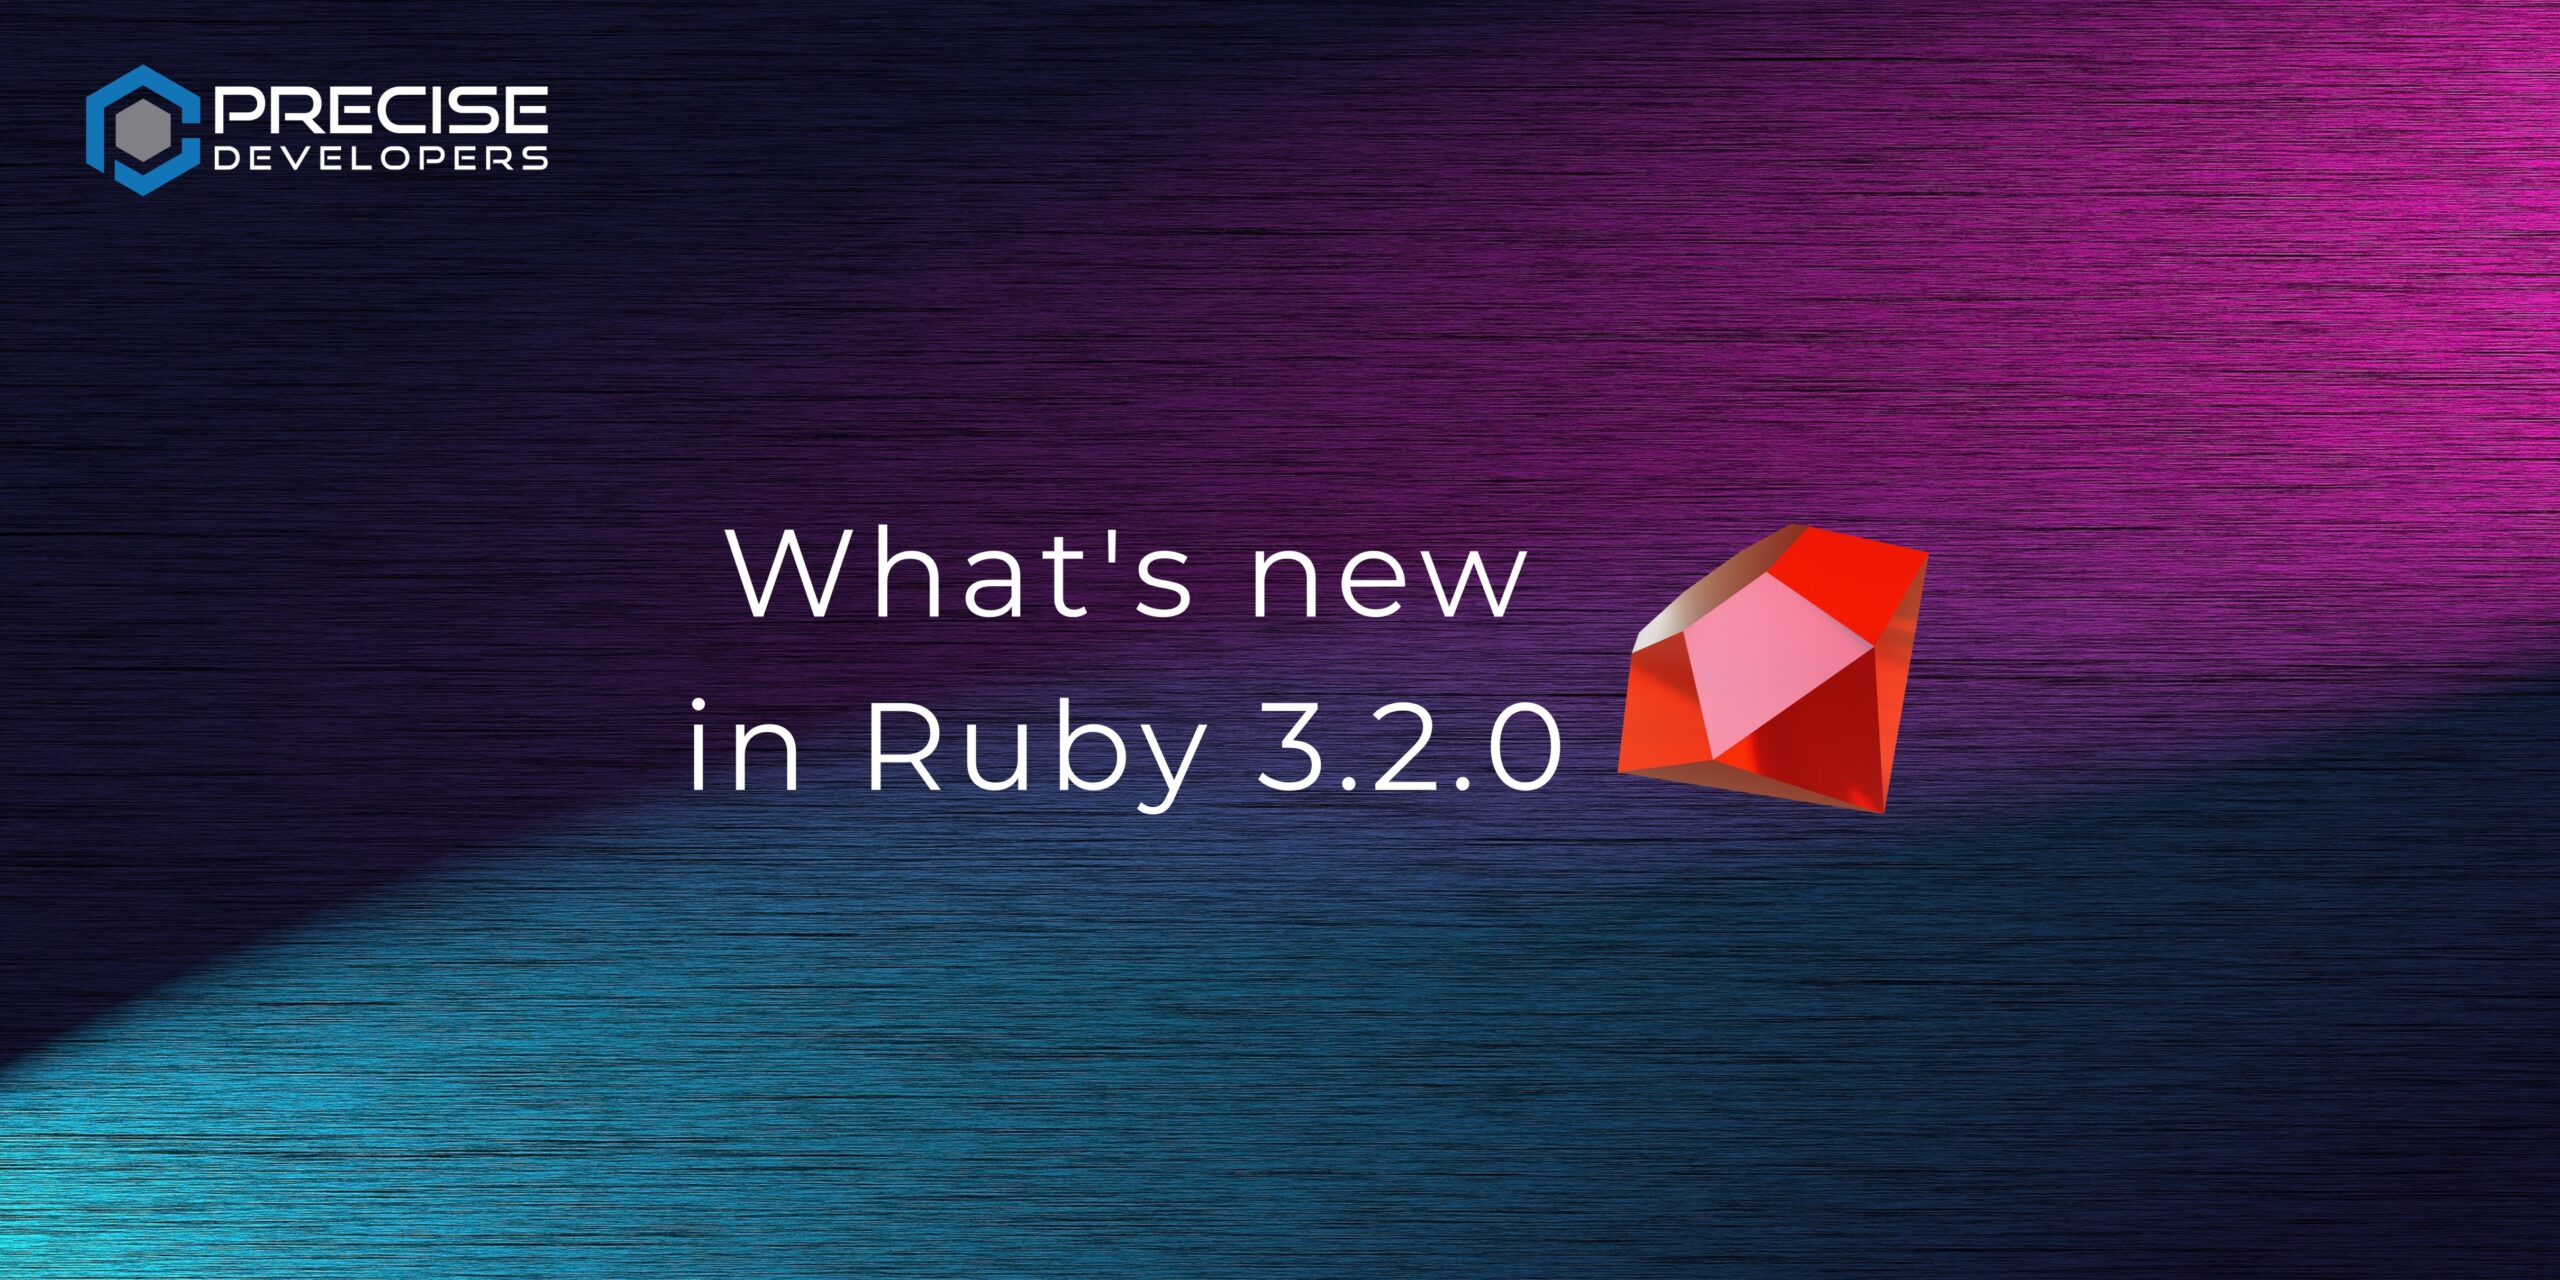 What's new in Ruby 3.2.0 Precise Developers